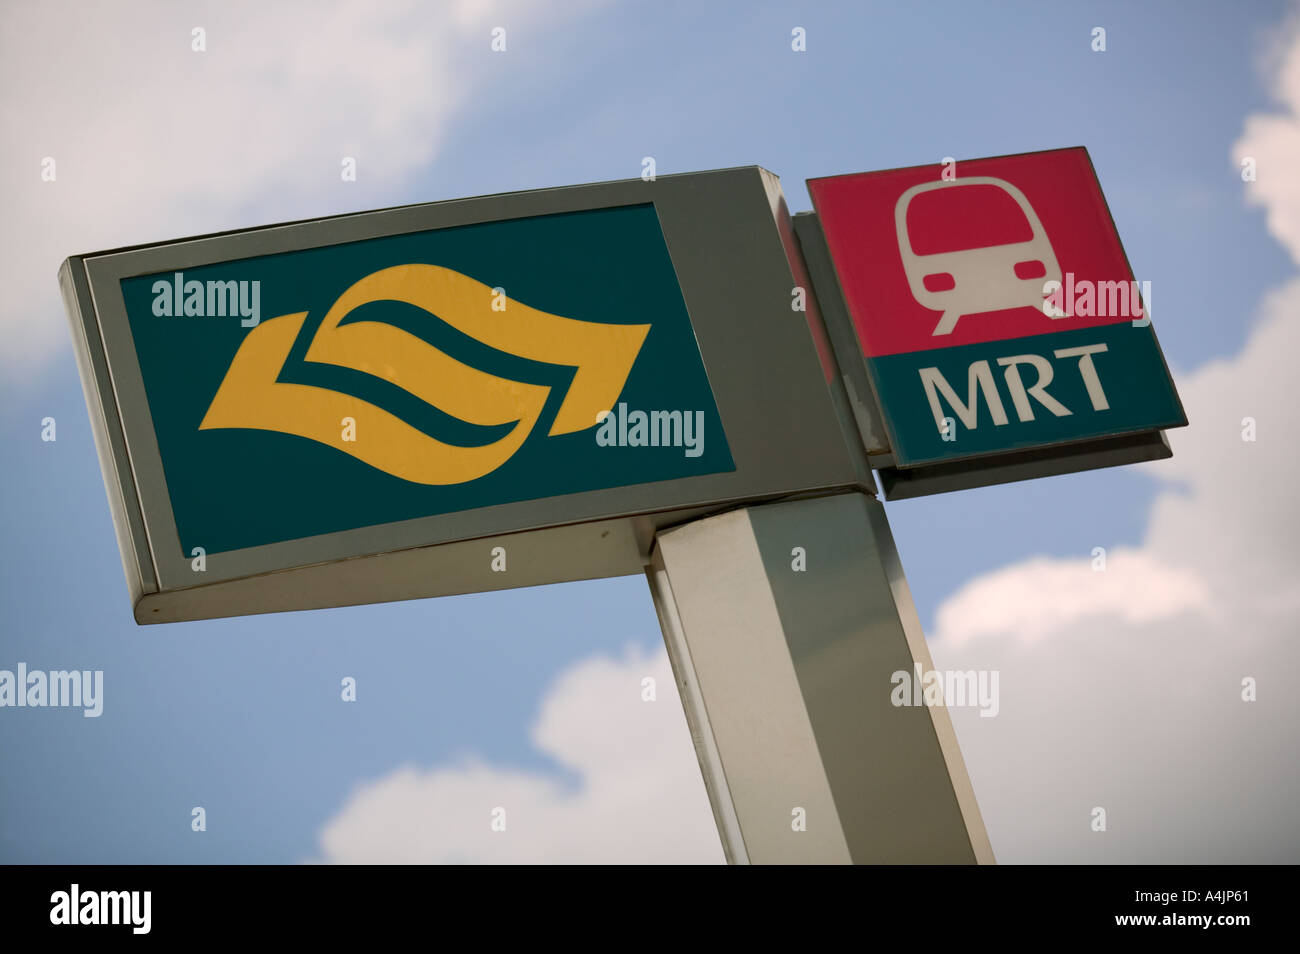 Detail of a Mass Rapid Transport (MRT) subway sign in Singapore. Stock Photo